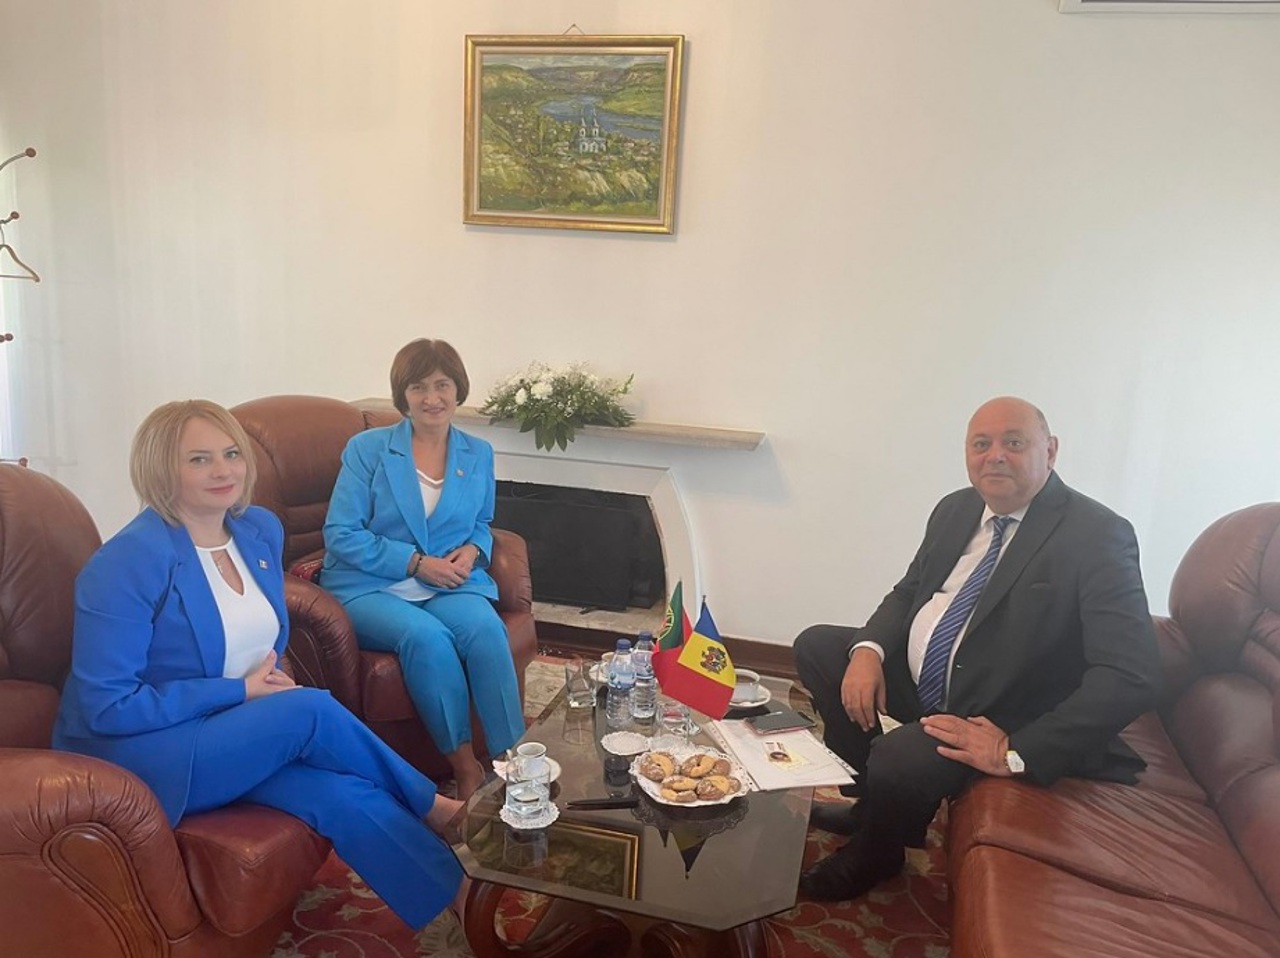 Portugal will continue to support the Republic of Moldova in the European integration process